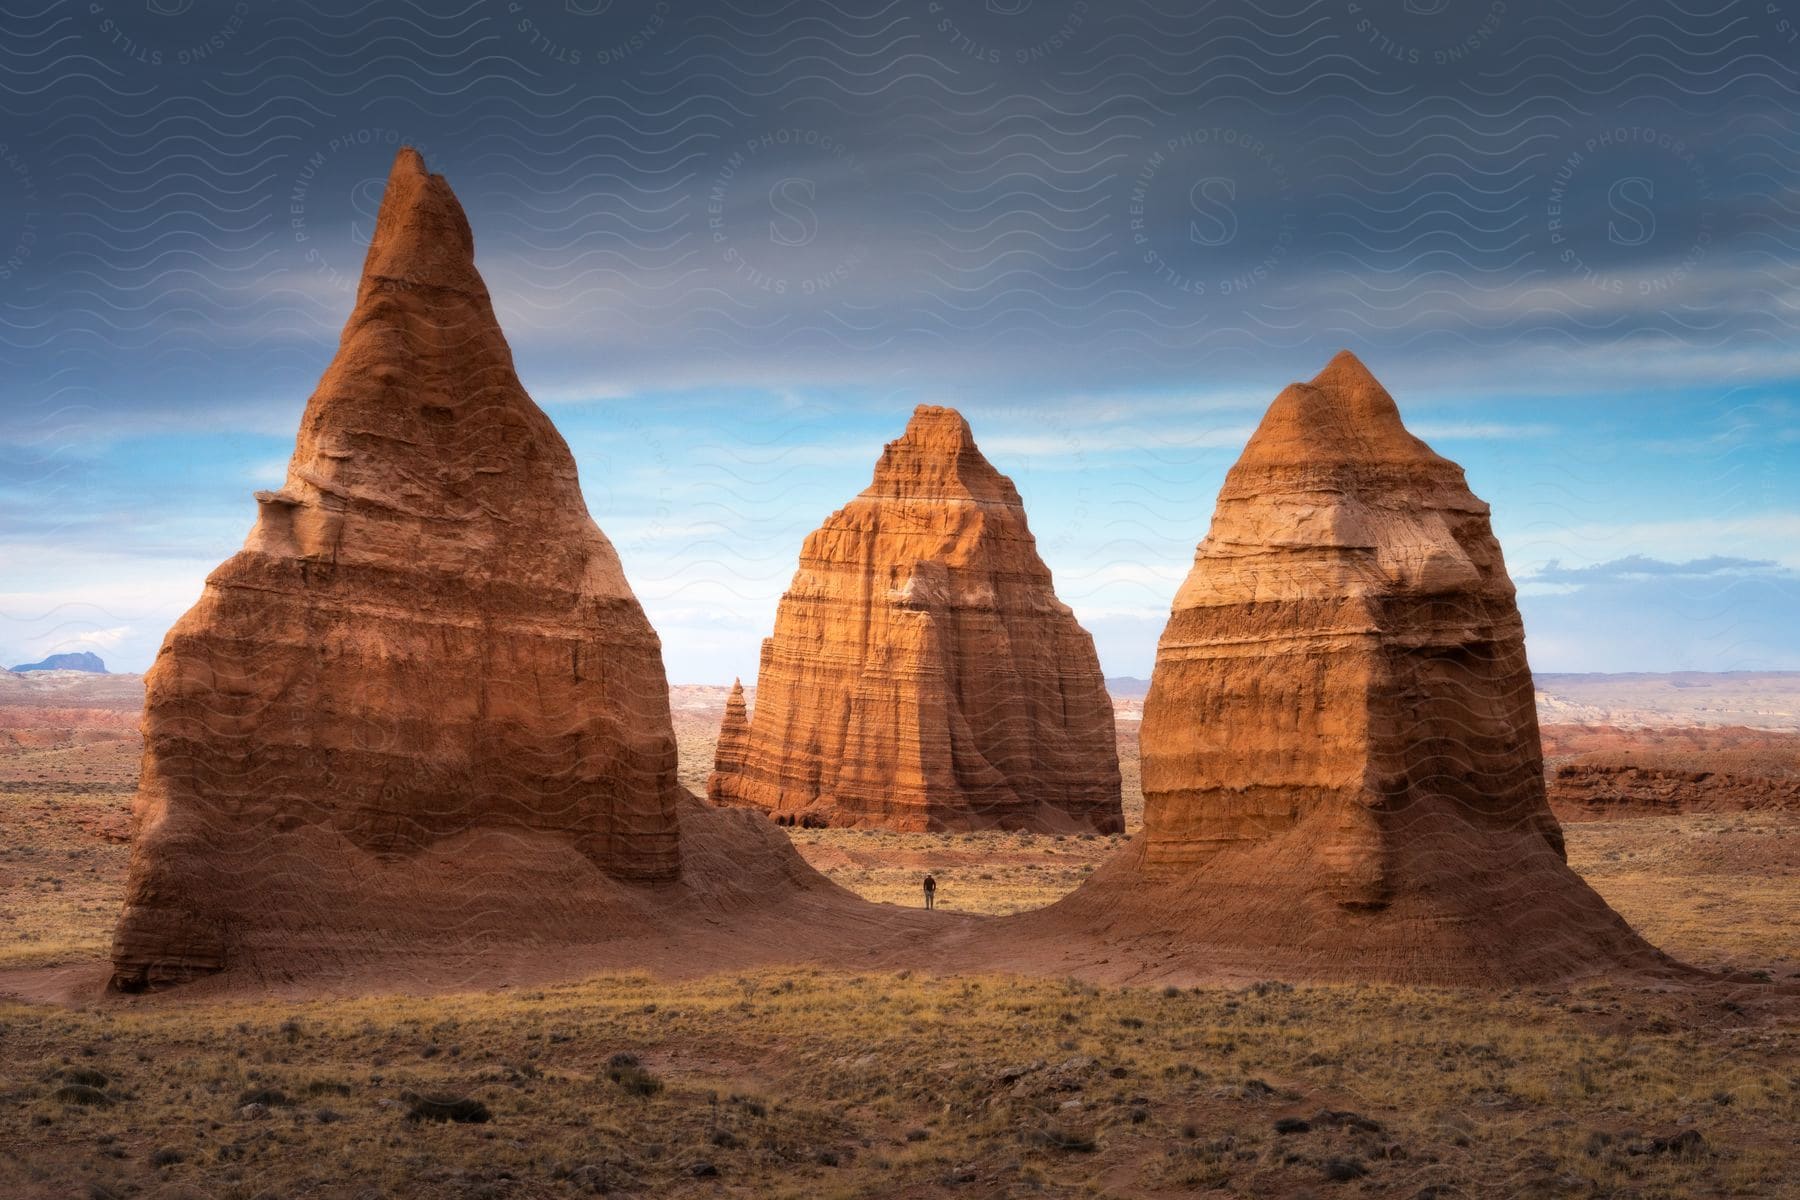 A person stands between three giant rocks in a desert on a mostly cloudy day.